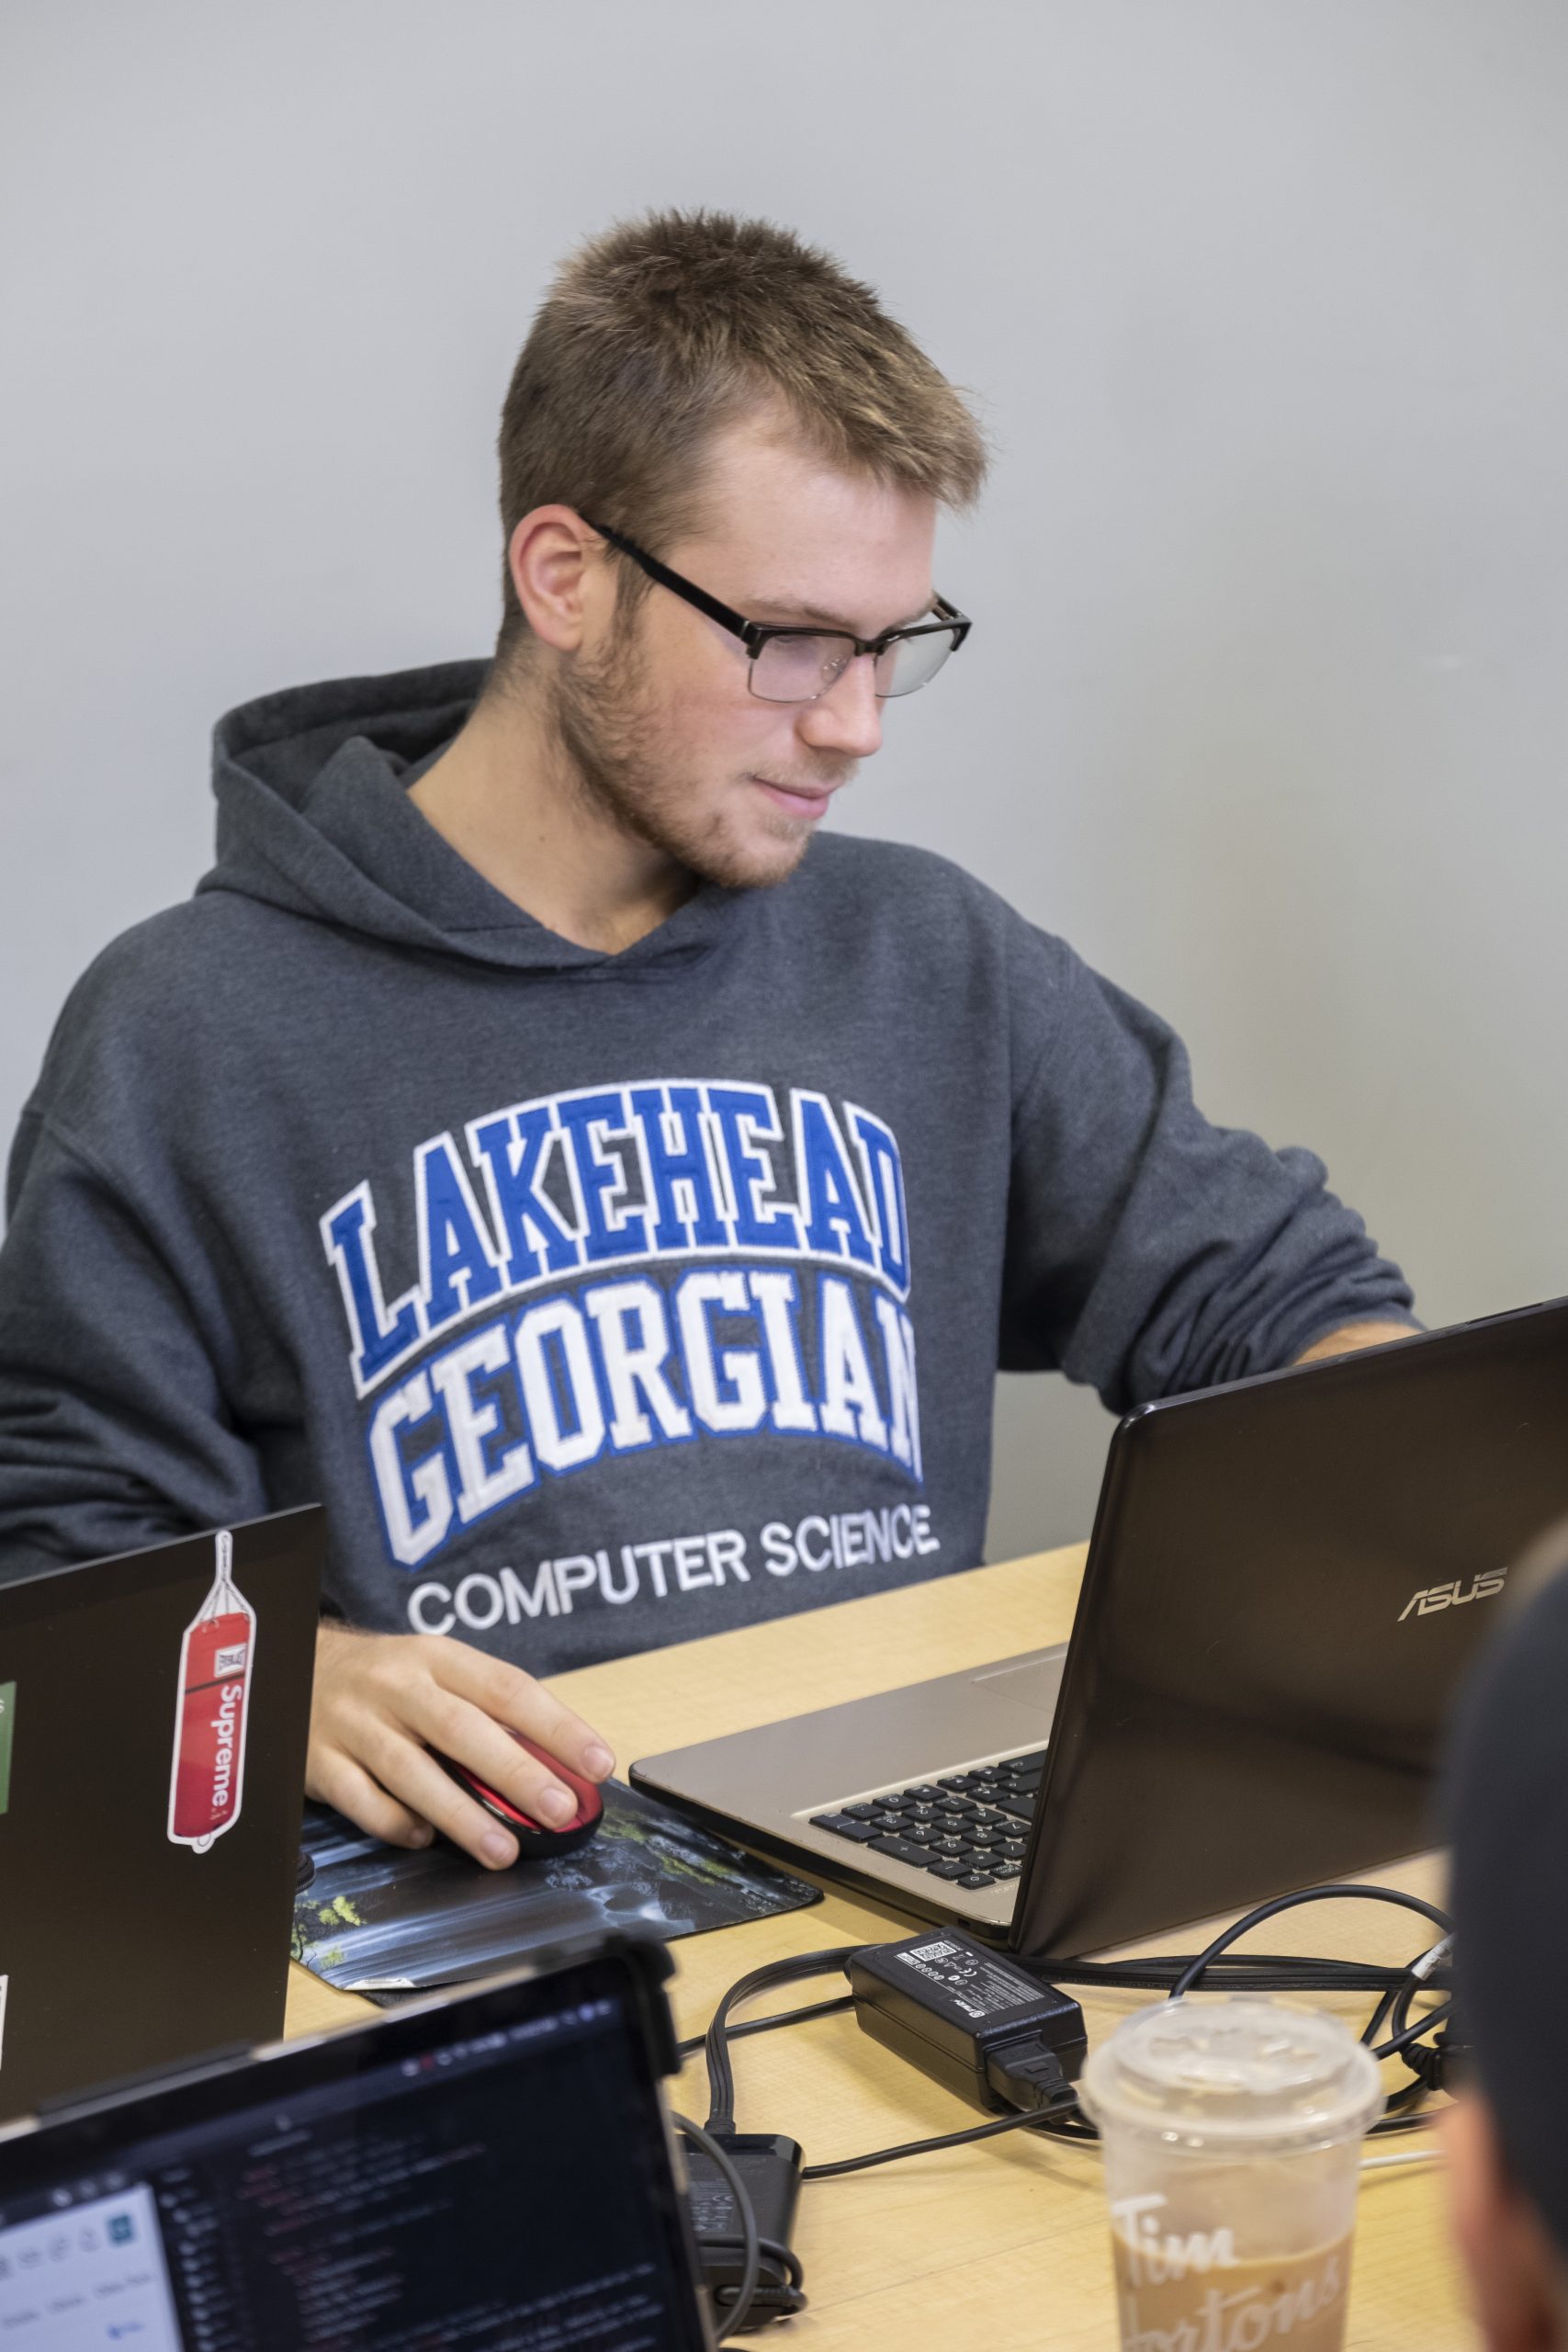 Computer Science student on their laptop